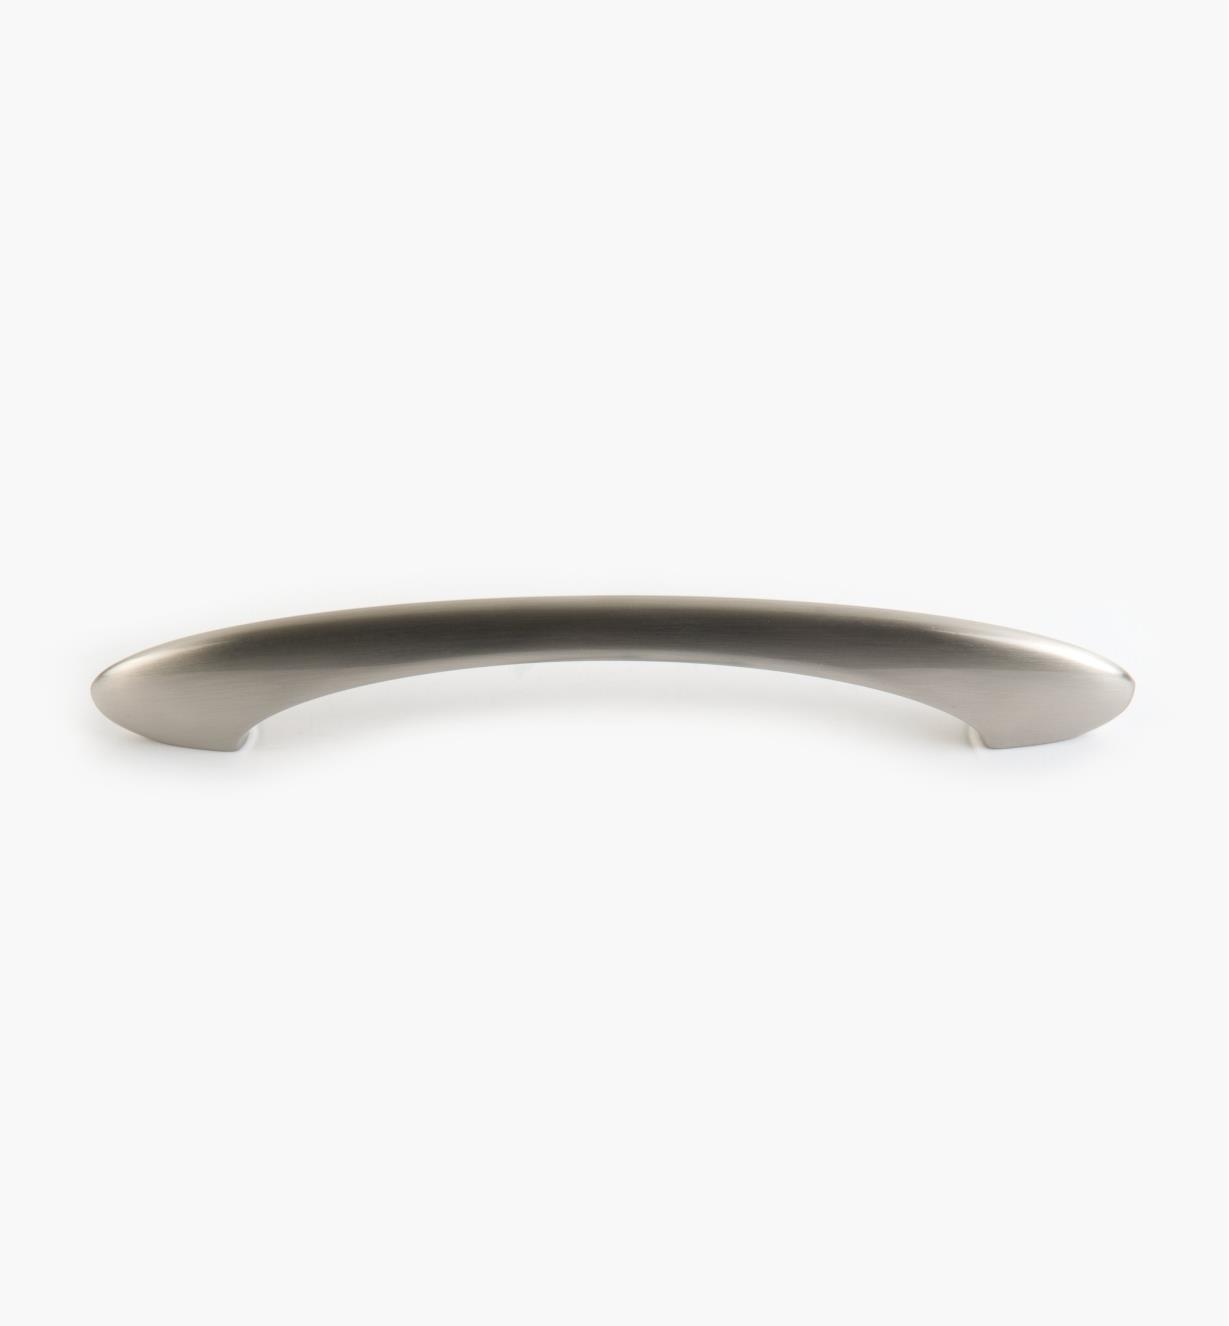 01G1463 - 160mm x 33mm Brushed Nickel Halo Handle